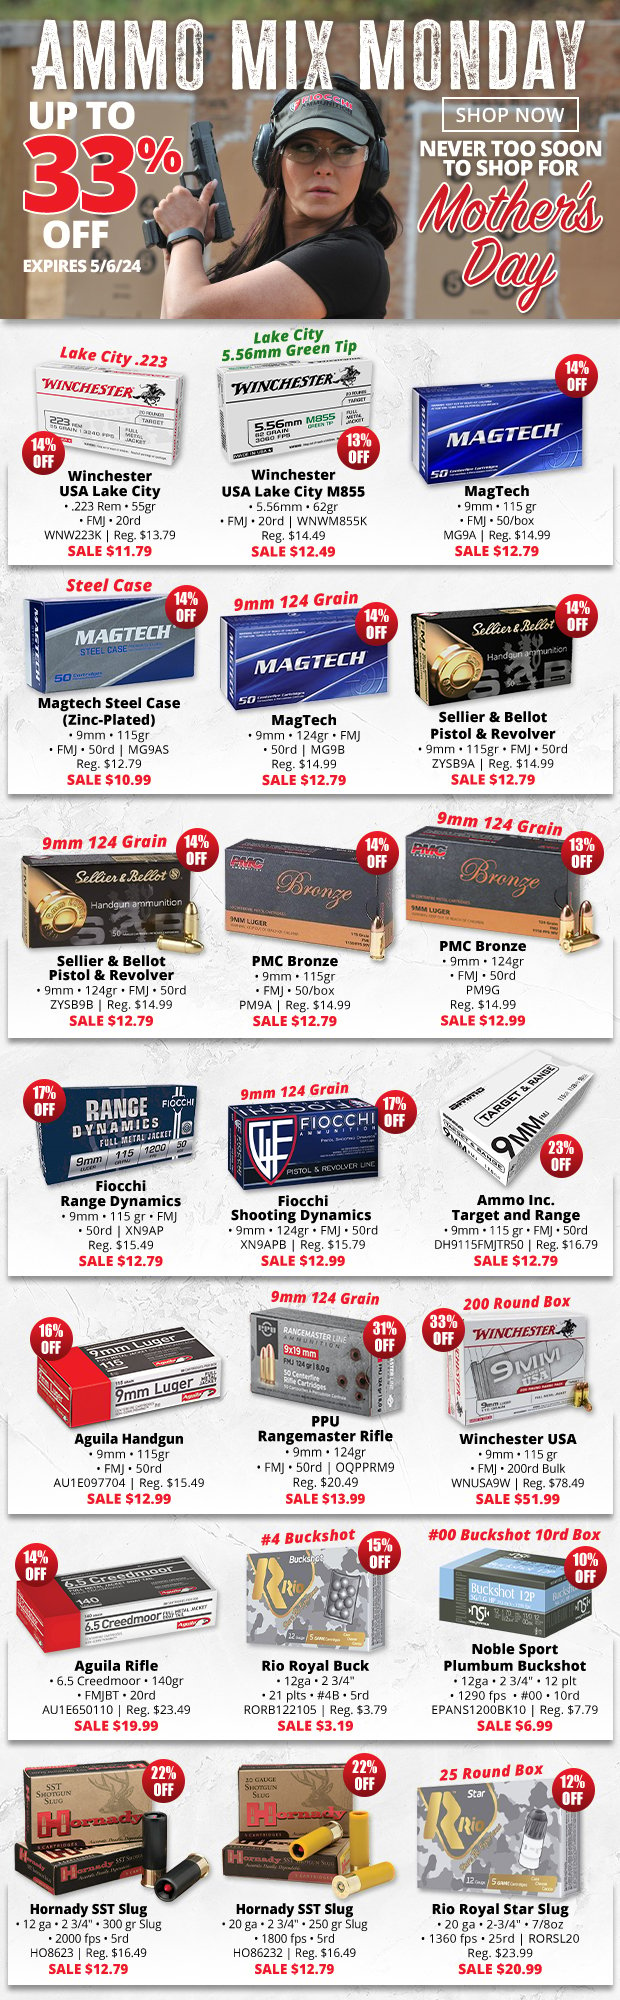 Up to 33% Off Ammo Mix Monday!